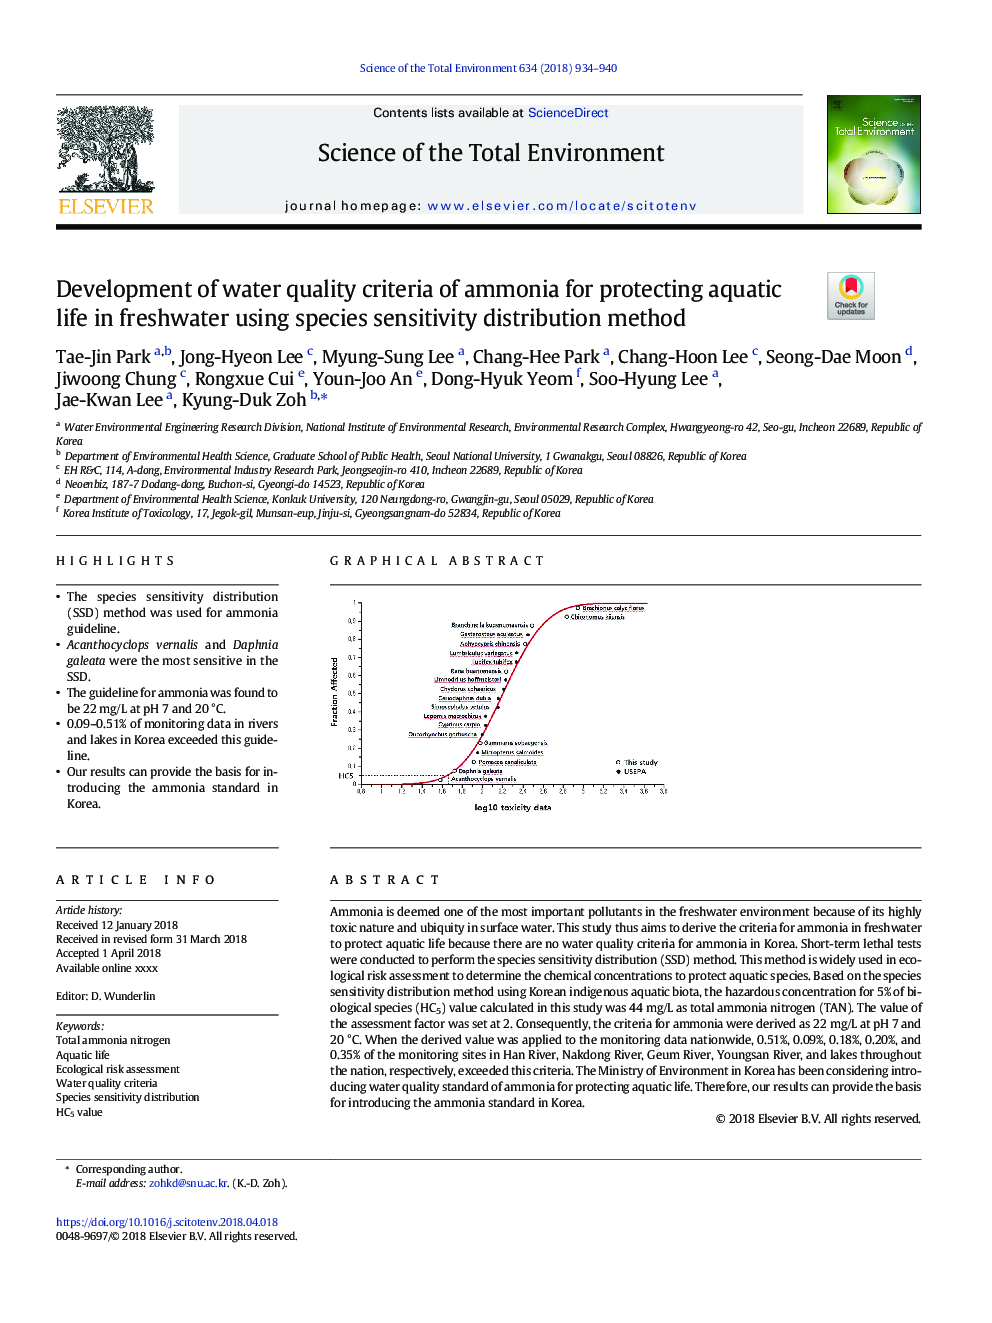 Development of water quality criteria of ammonia for protecting aquatic life in freshwater using species sensitivity distribution method